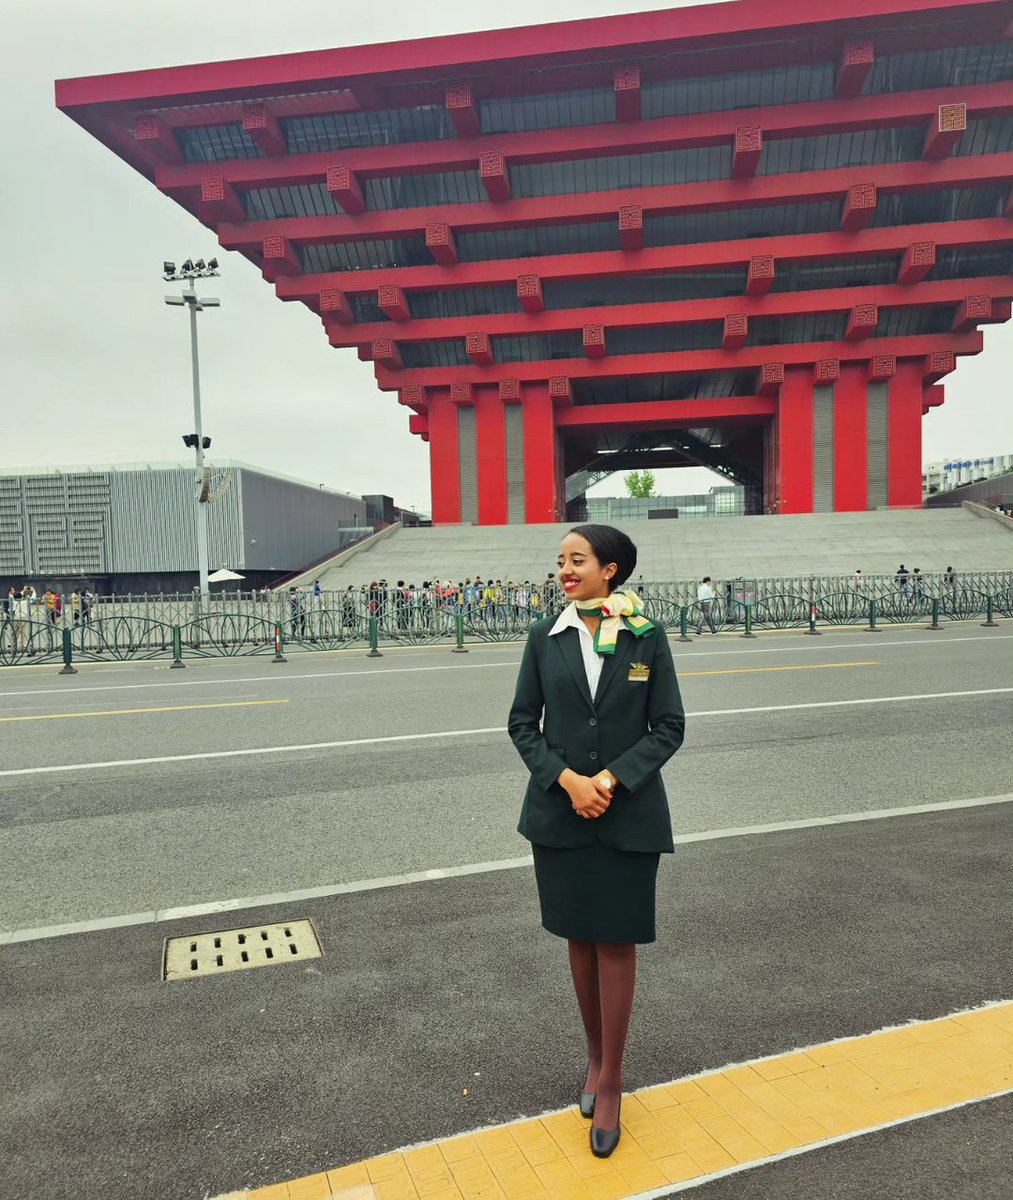 Embodying grace and professionalism, the Ethiopian Airlines cabin crew takes flight with warmth and excellence. #EthiopianAirlines #ExcellenceInFlight